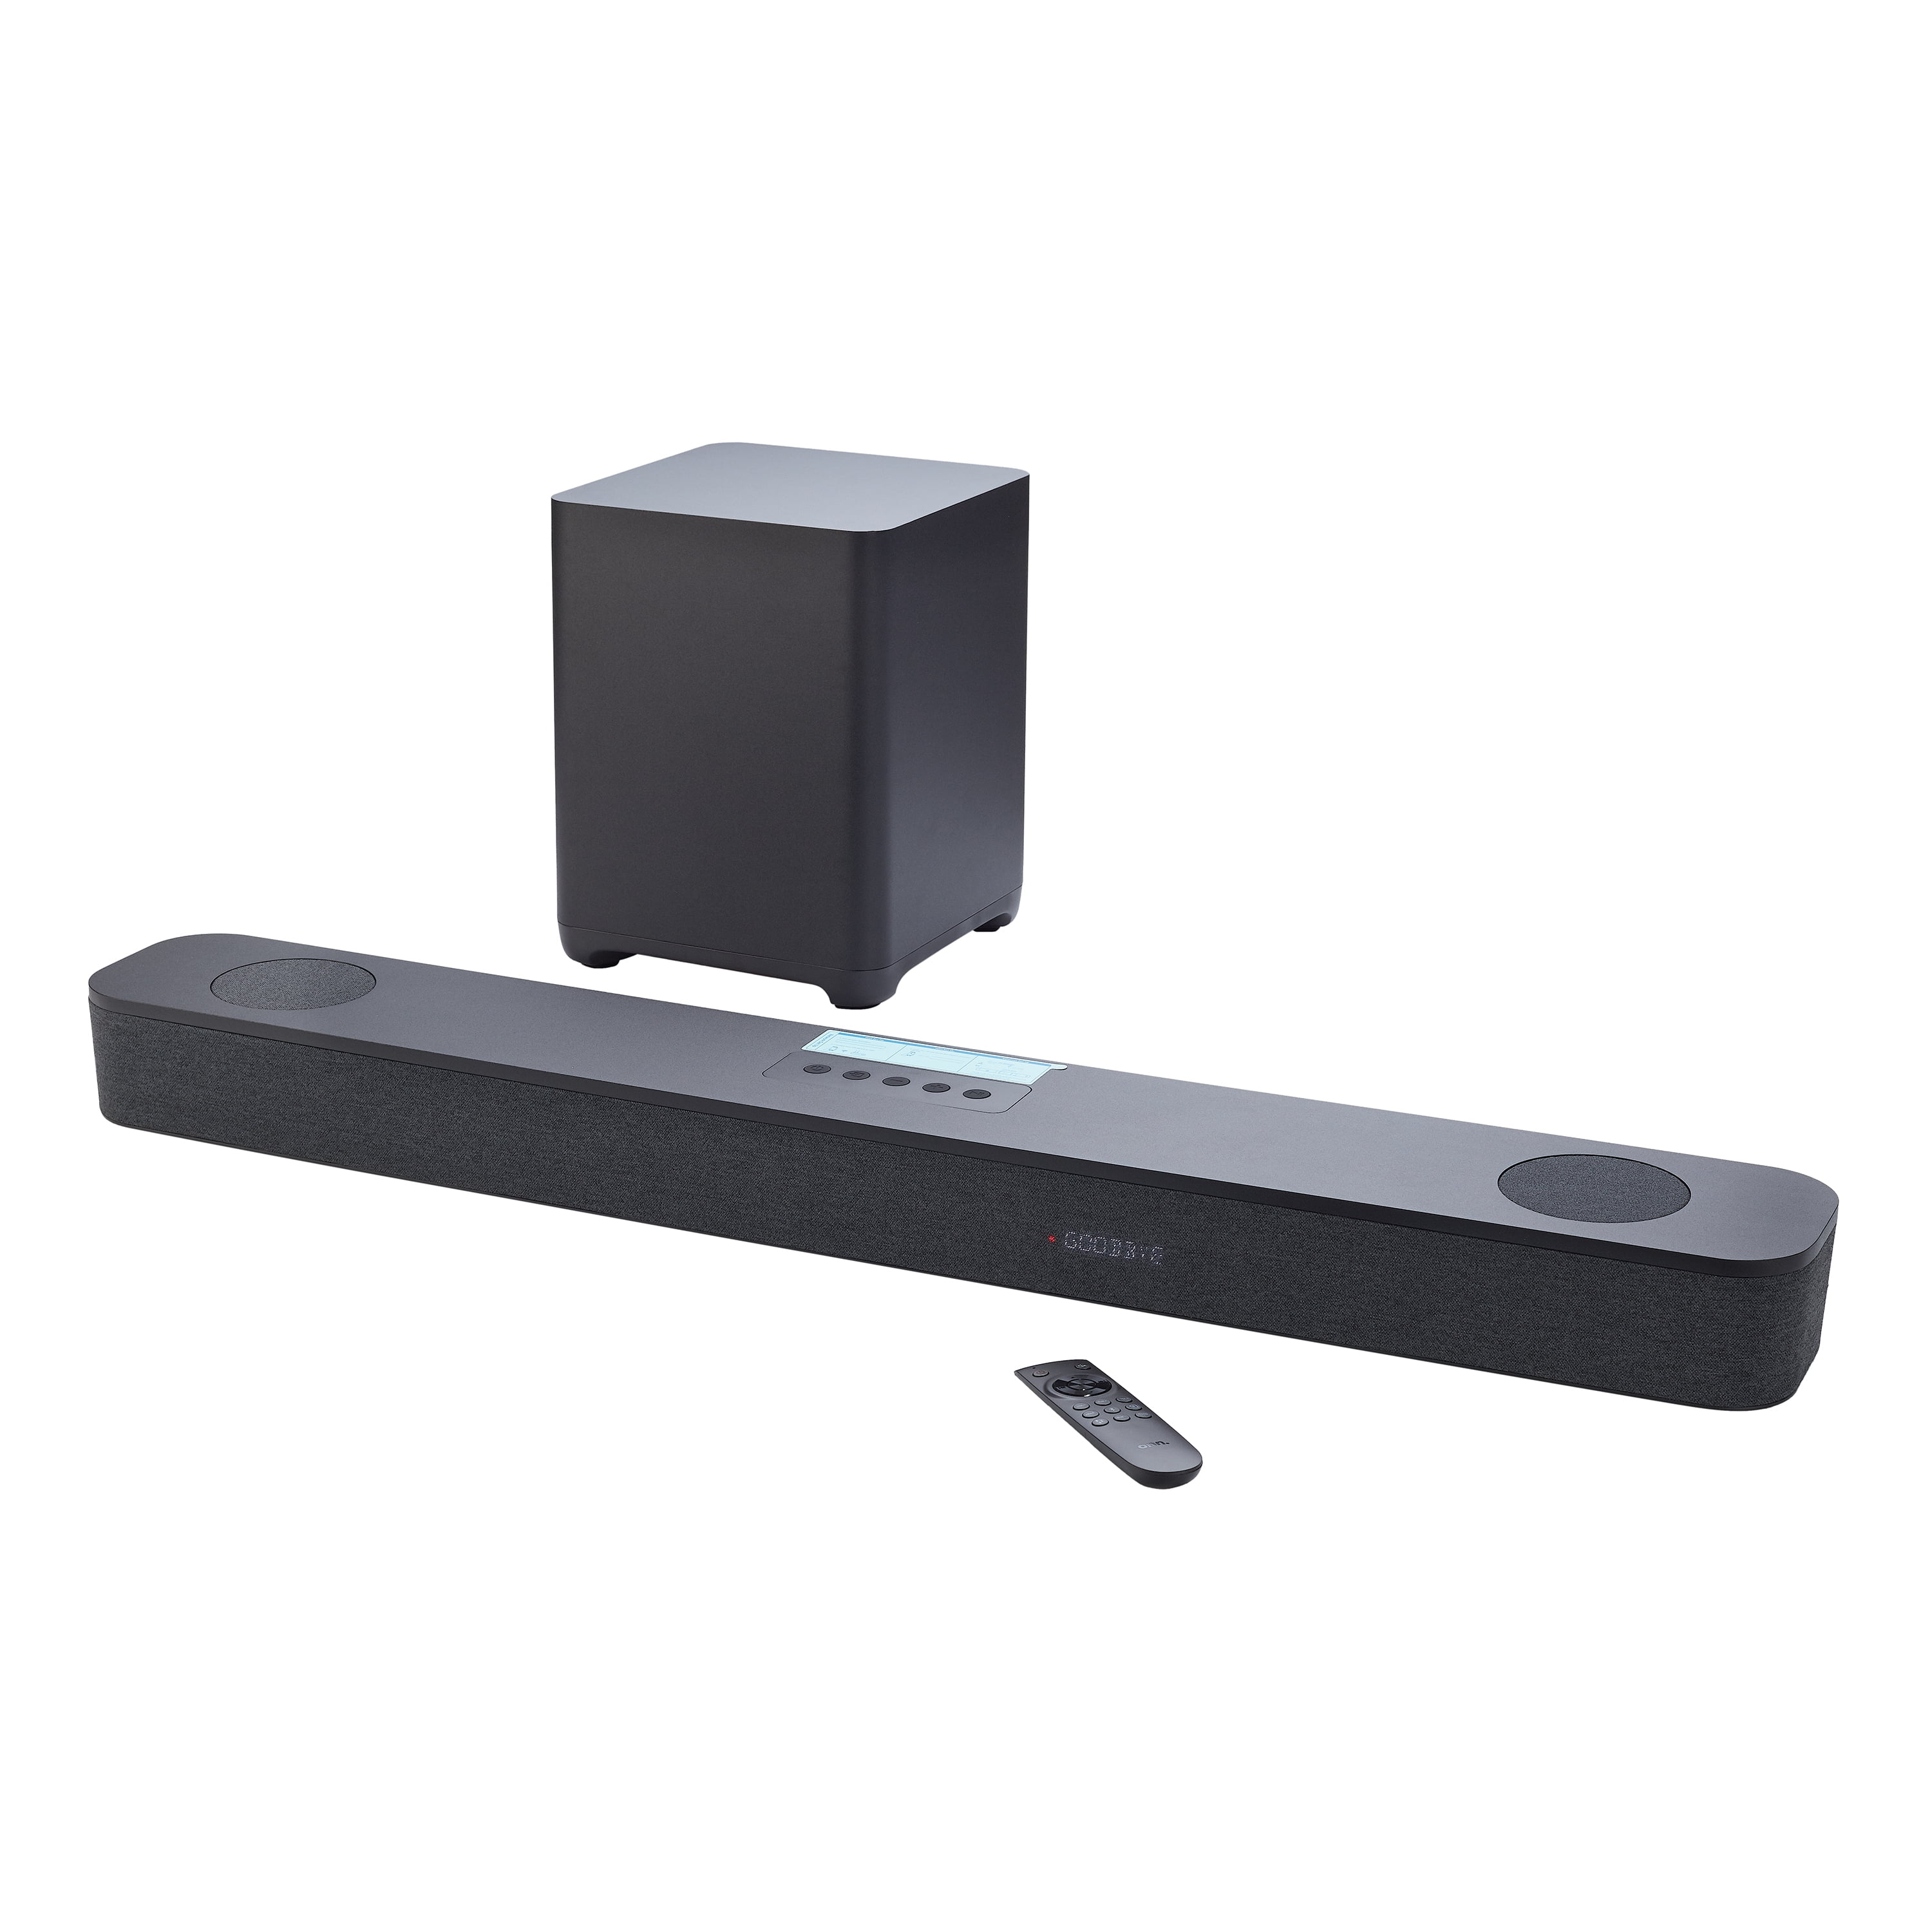 NEW - onn. 5.1.2 Soundbar with Dolby Atmos and Wireless Subwoofer, 42 